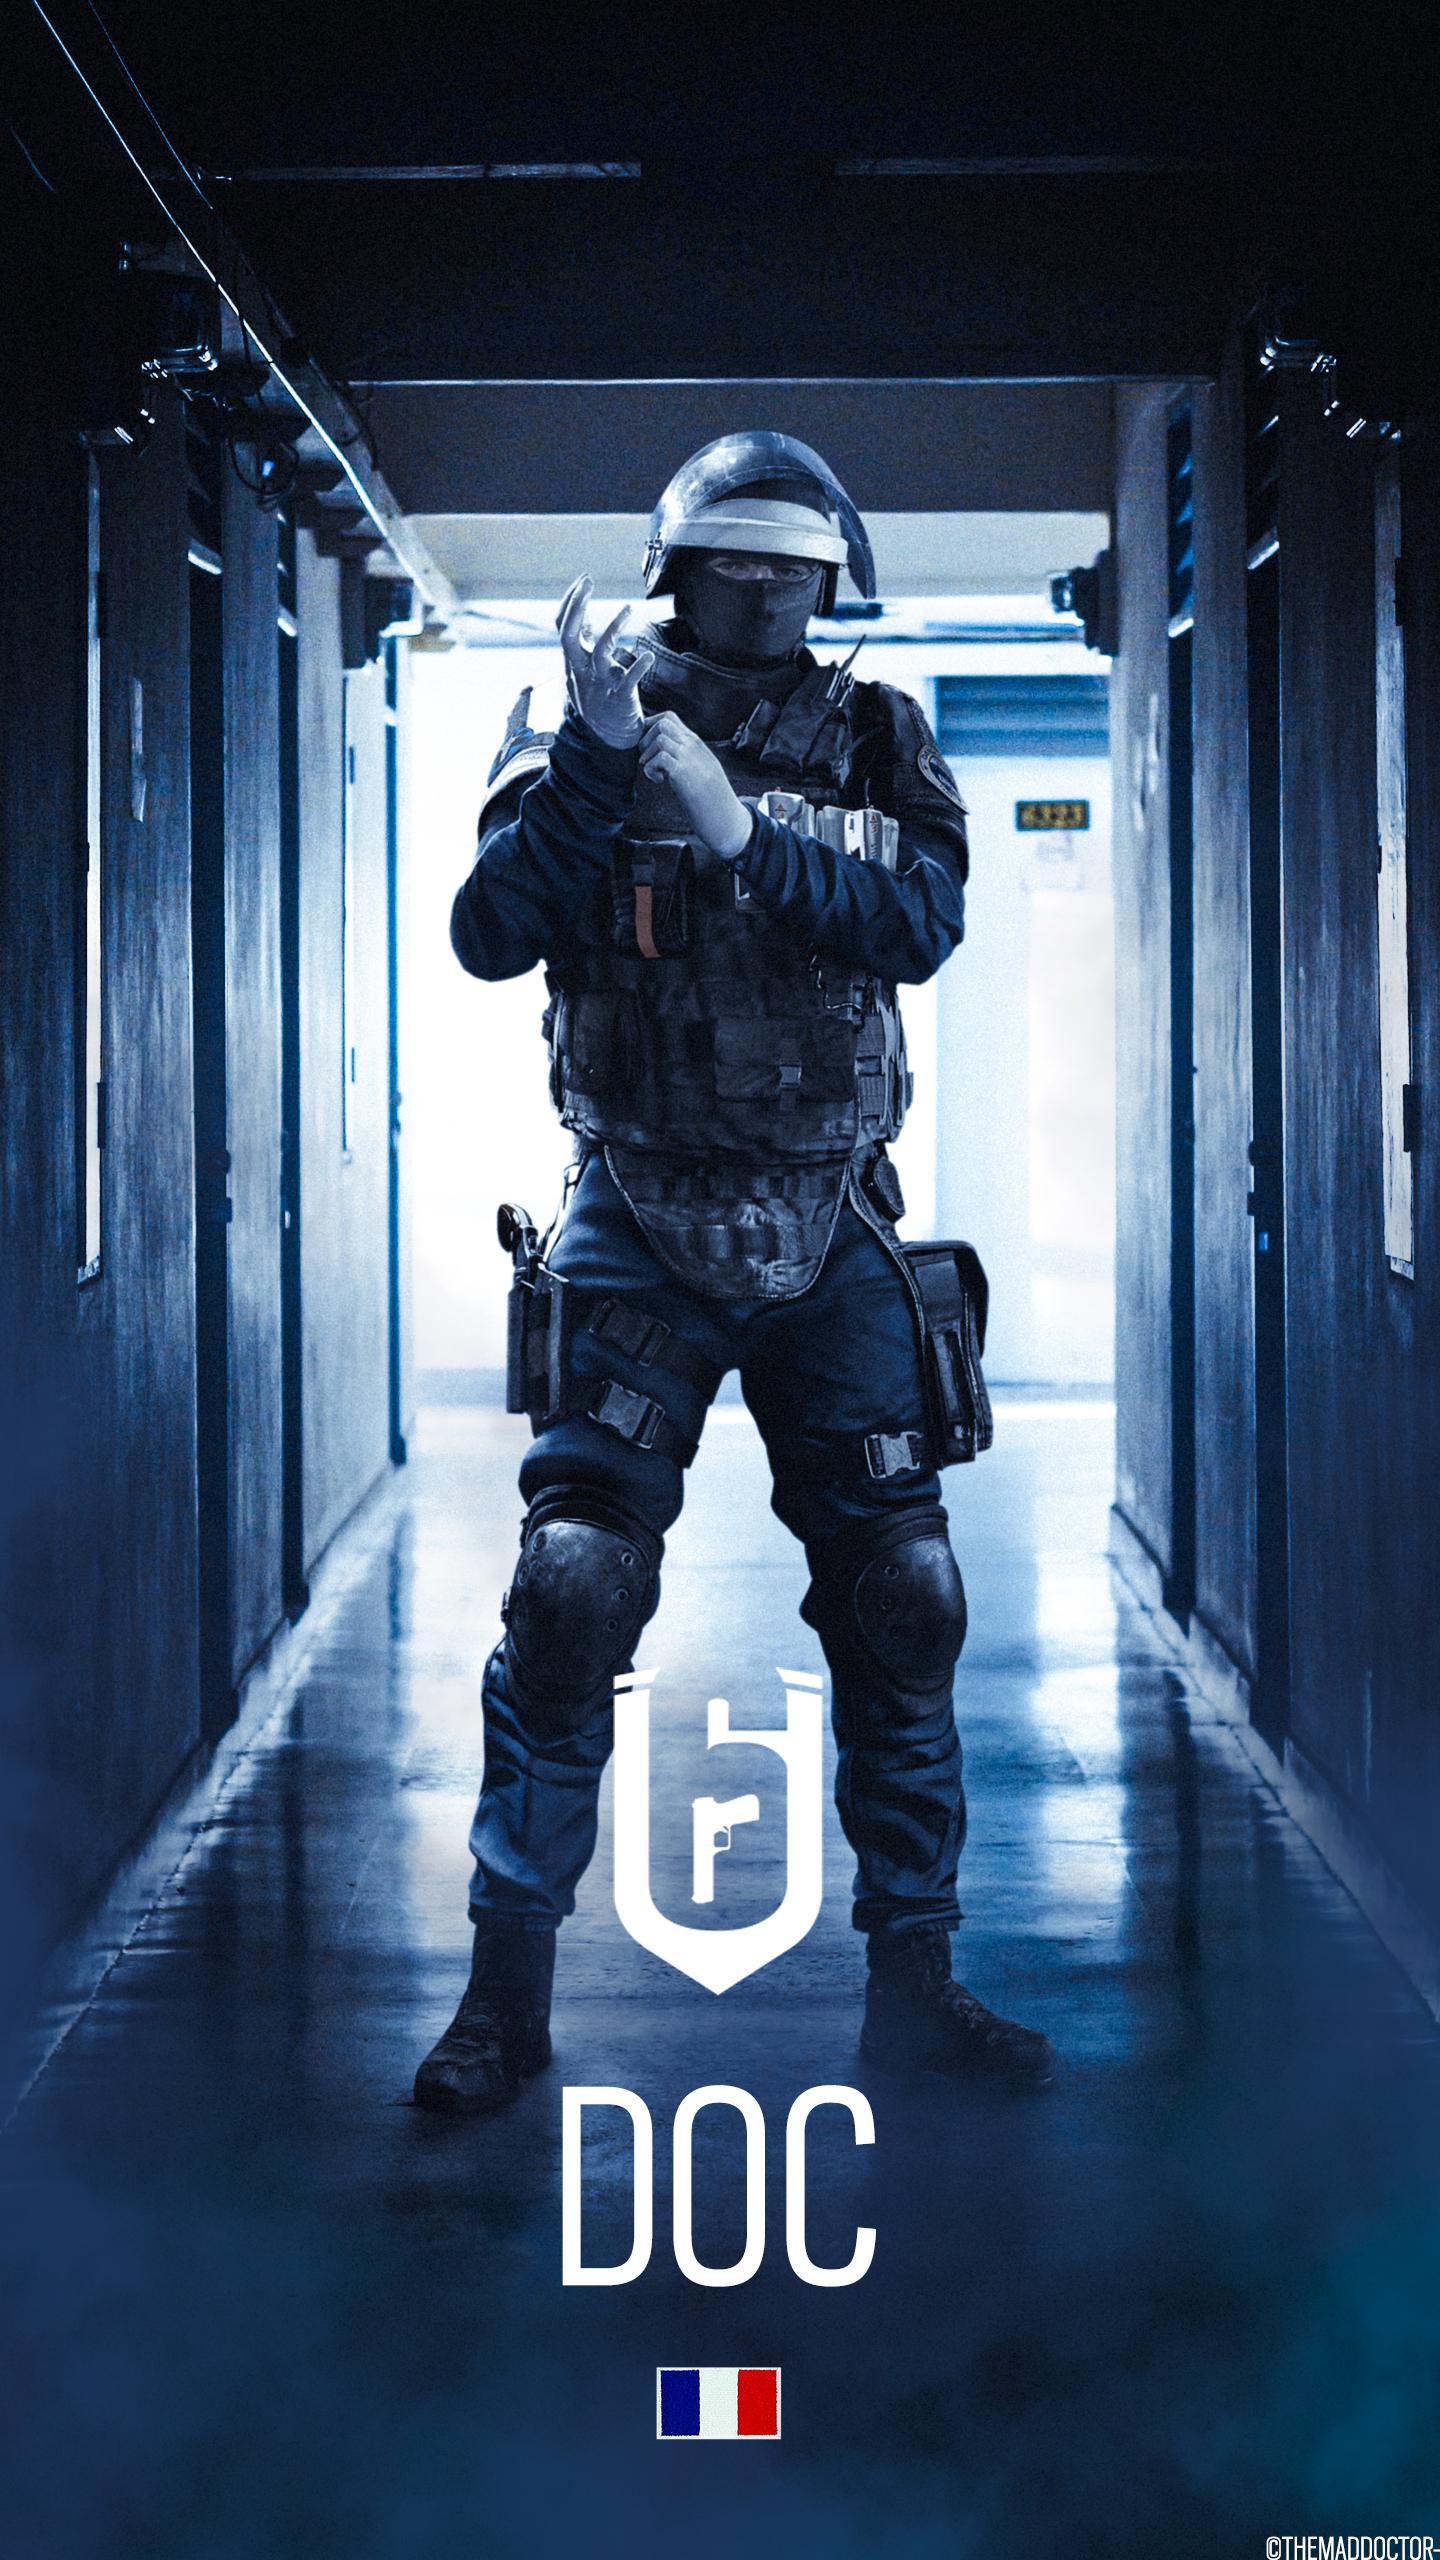 Here S The Phone Wallpaper For My Main Defending Operator Doc